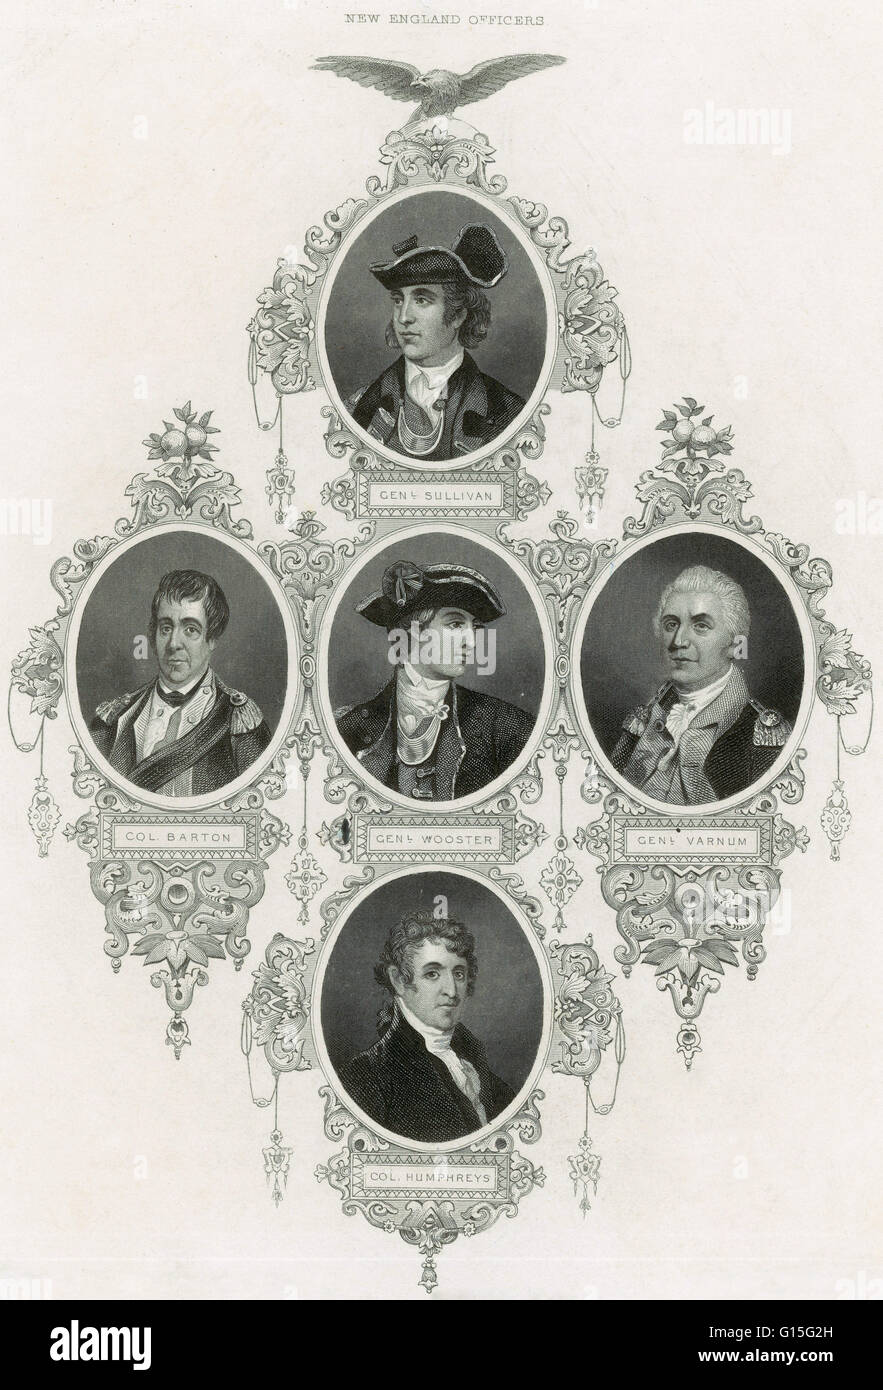 New england officers from the 1700's: General Sullivan (top); middle row L to R: Colonel Barton, General Wooster, General Varnmum; Colonel Humphreus (bottom). Stock Photo